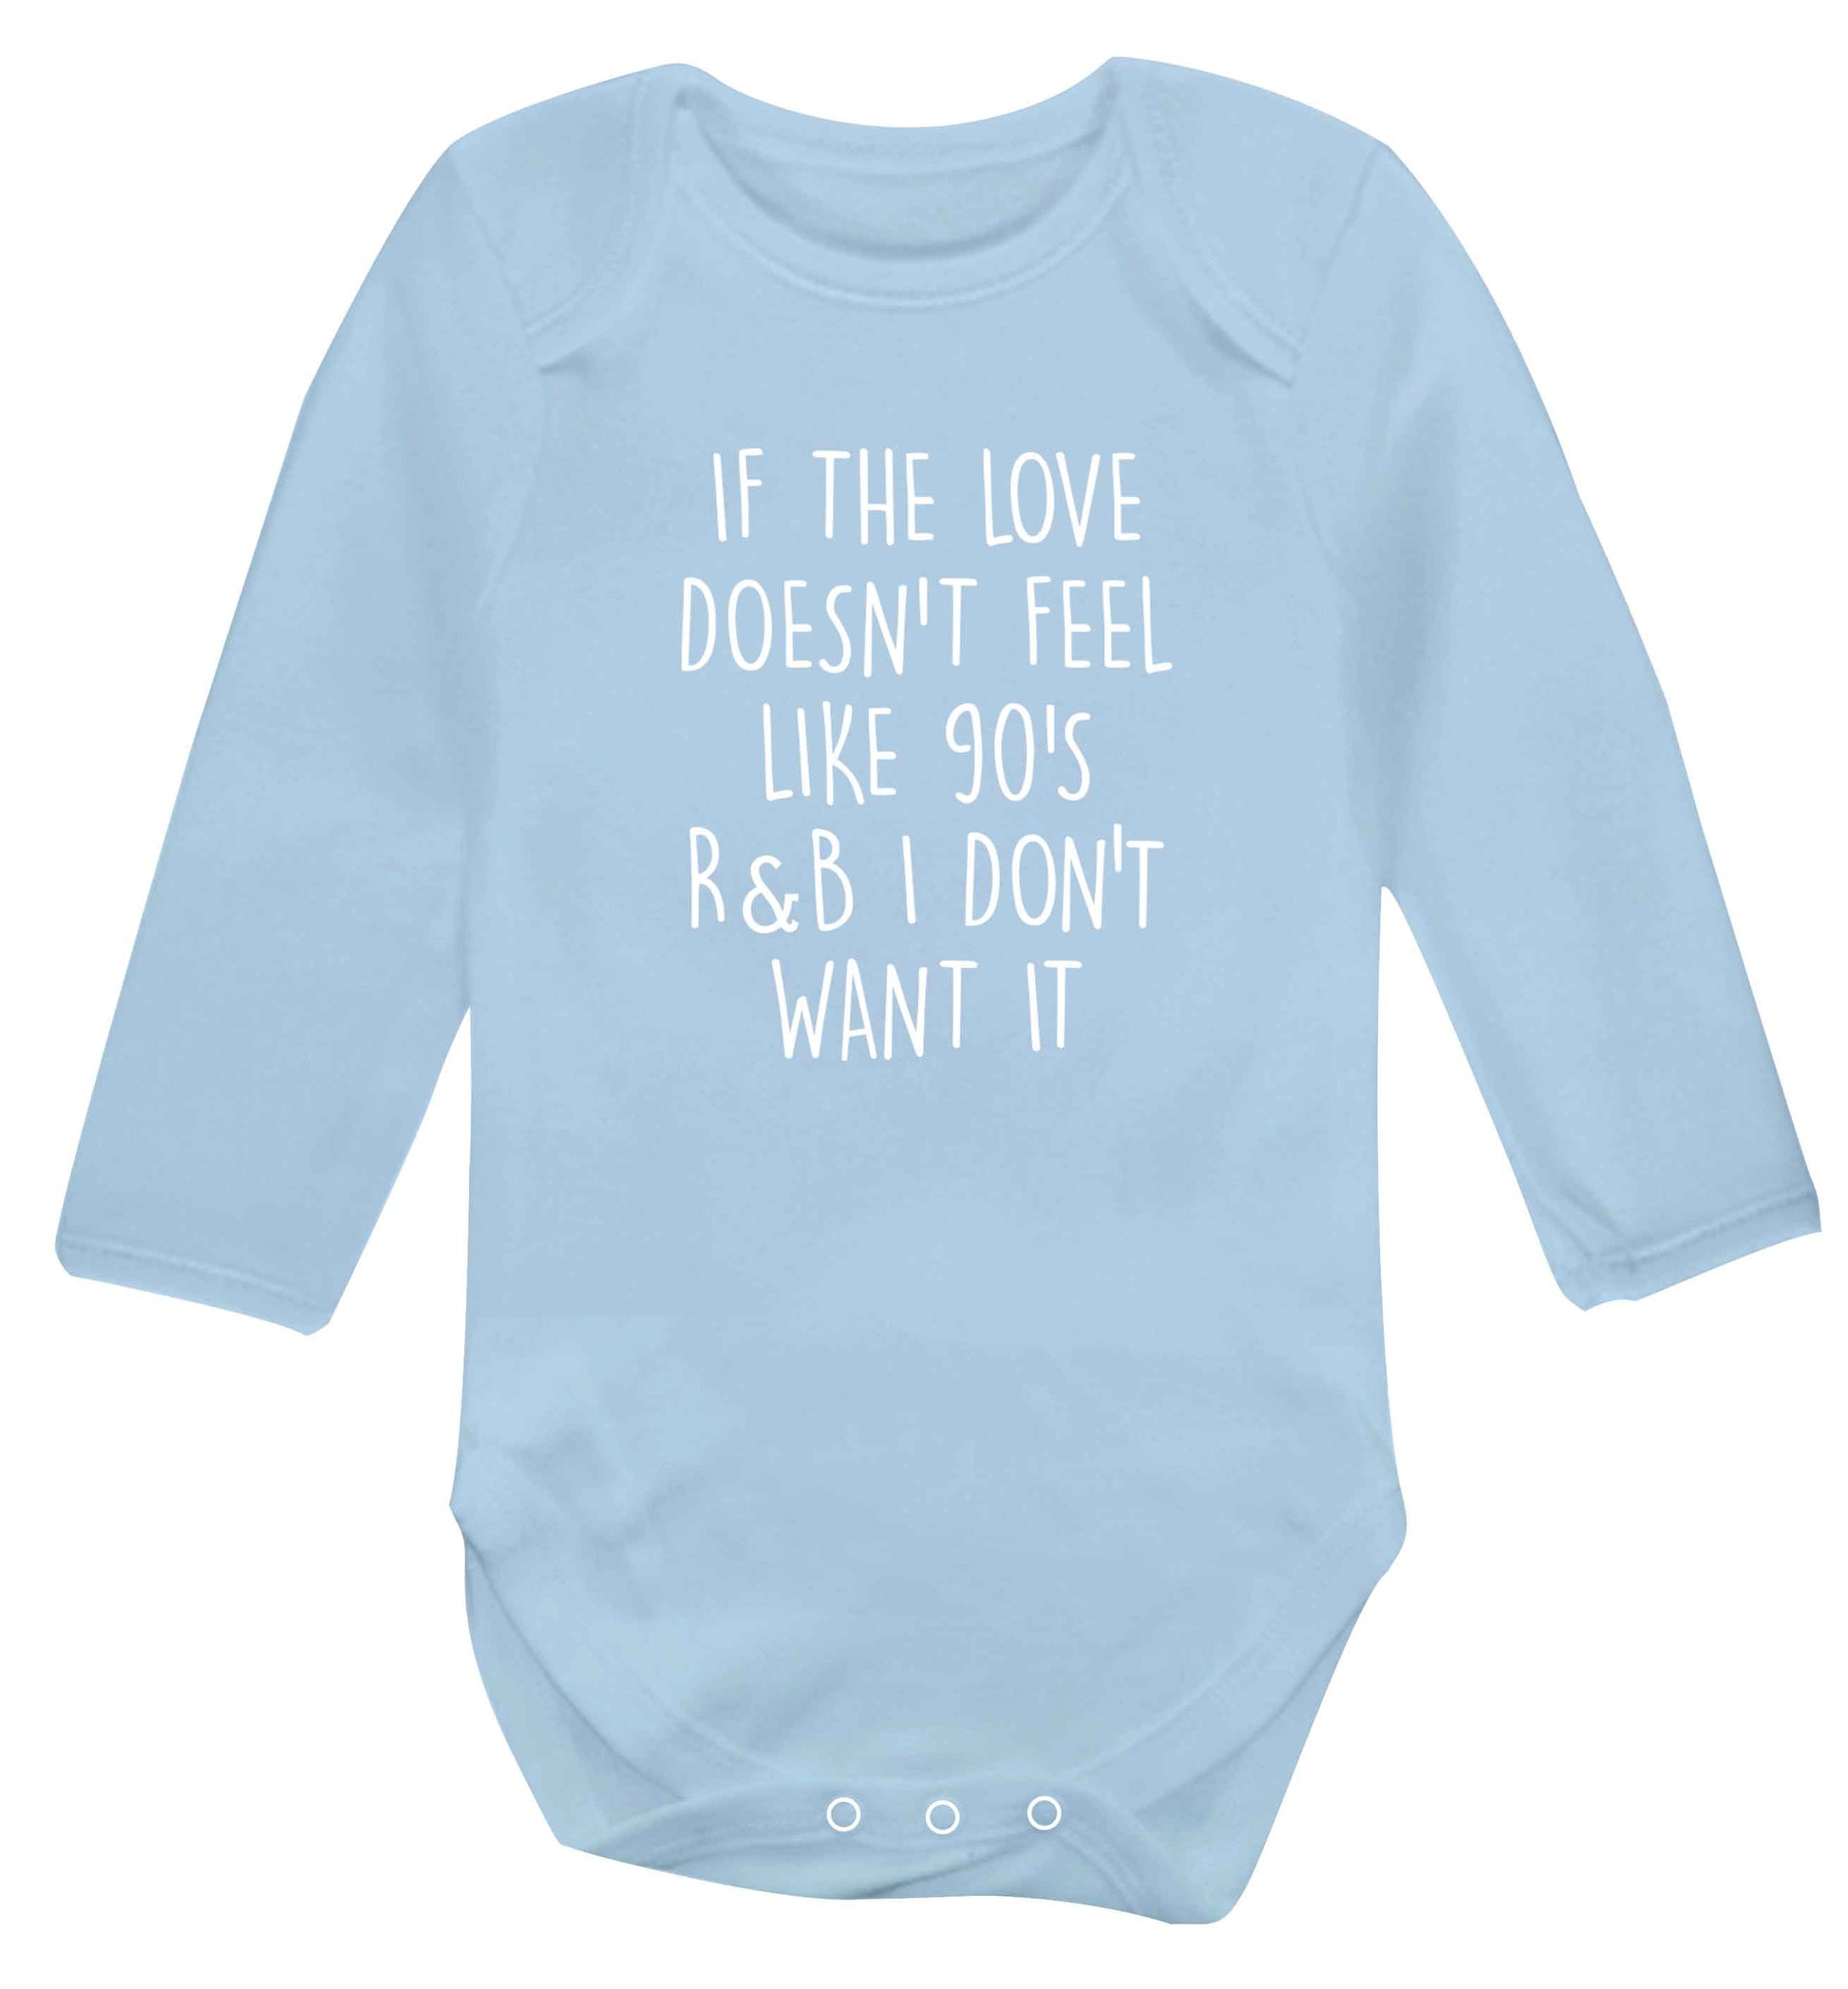 If the love doesn't feel like 90's r&b I don't want it baby vest long sleeved pale blue 6-12 months